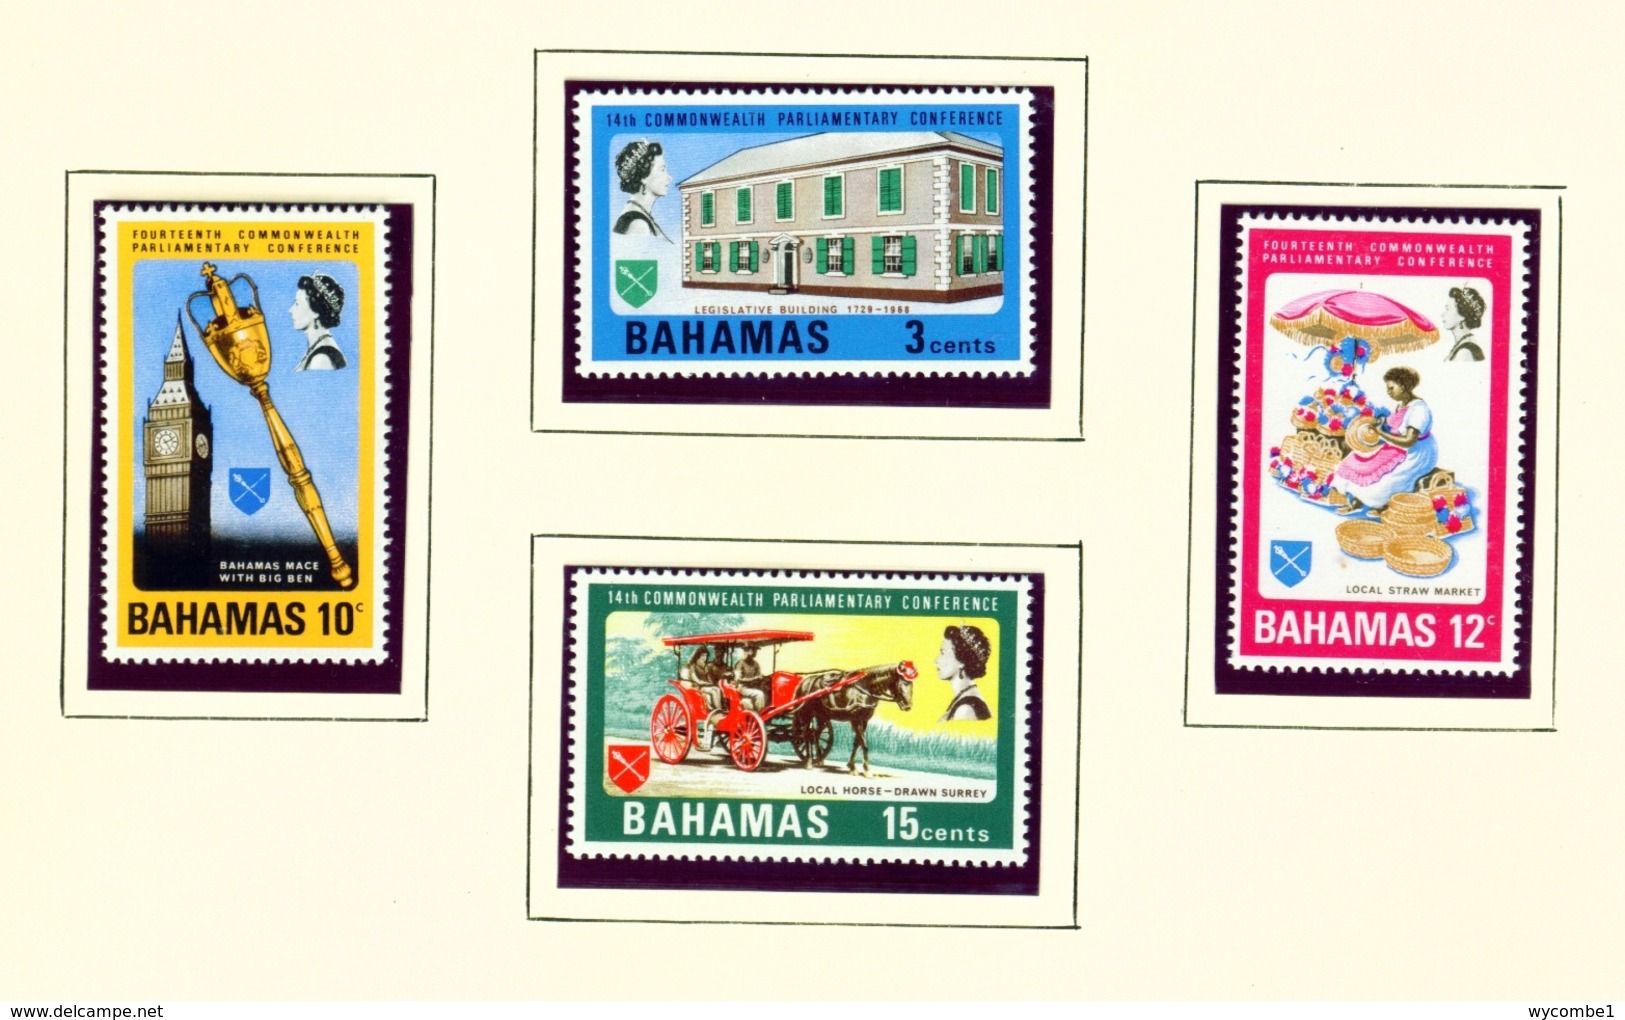 BAHAMAS  -  1968 Parliamentary Conference Set Unmounted/Never Hinged Mint - 1963-1973 Ministerial Government